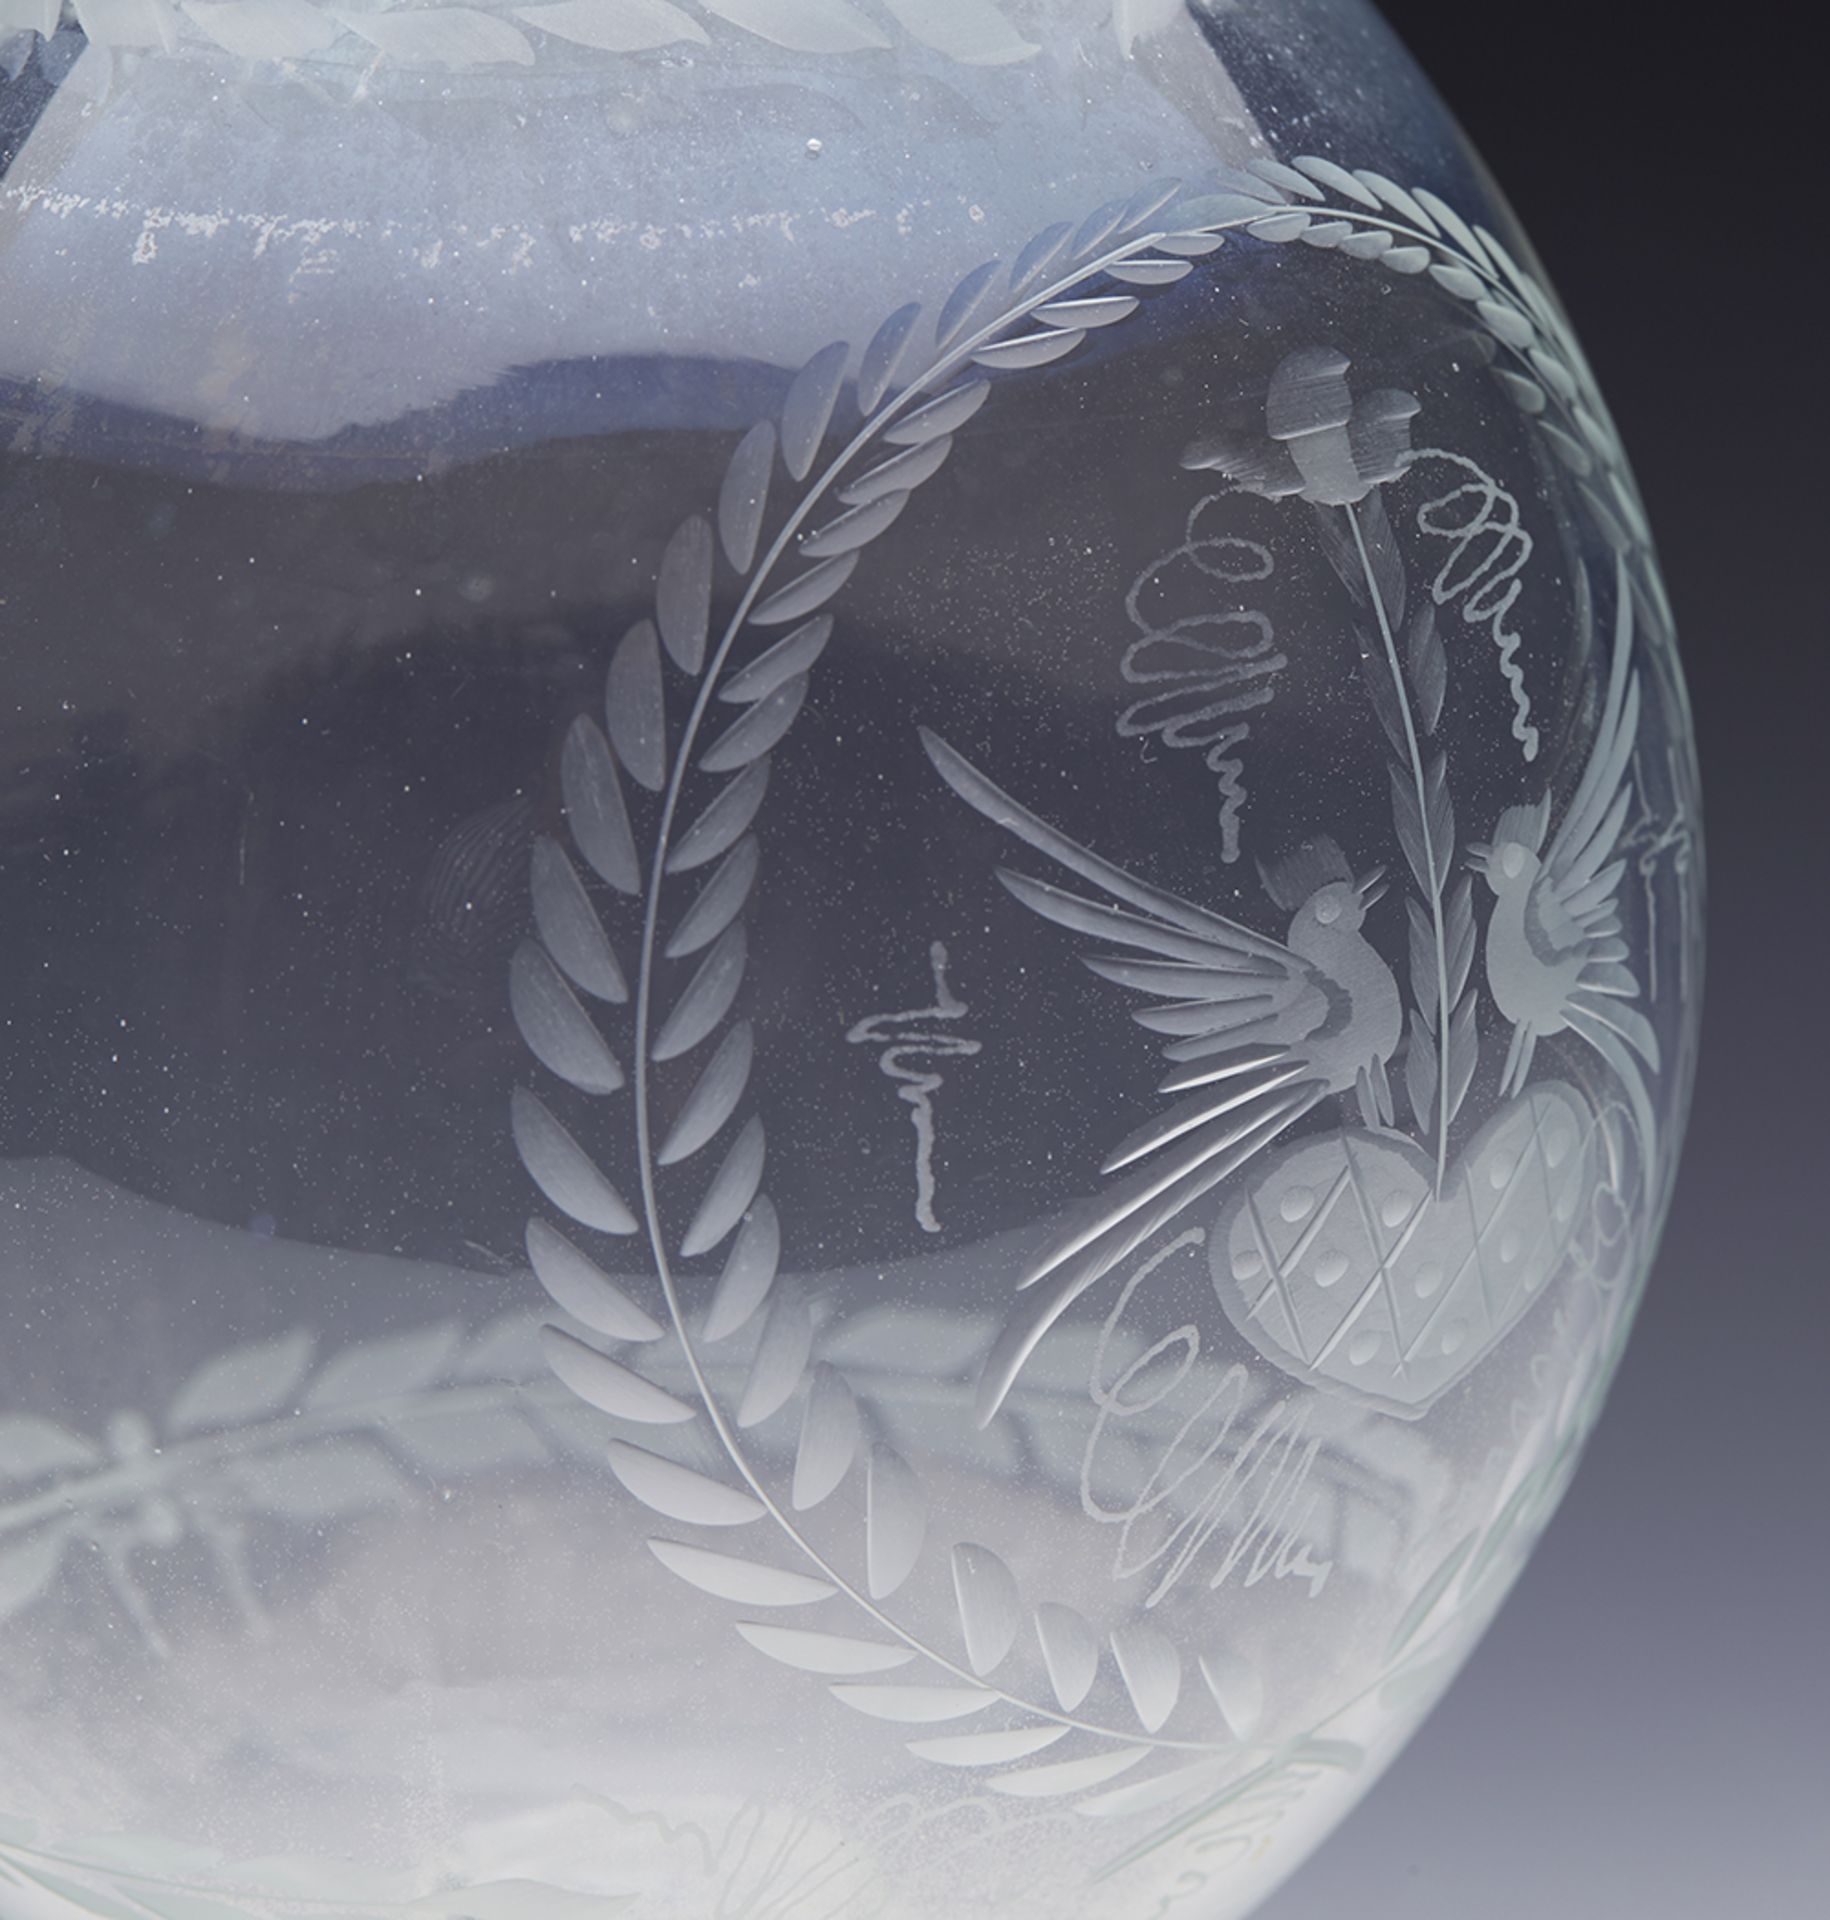 ANTIQUE GLASS MARRIAGE CARAFE ENGRAVED WITH LOVE BIRDS 19TH C. - Image 9 of 14